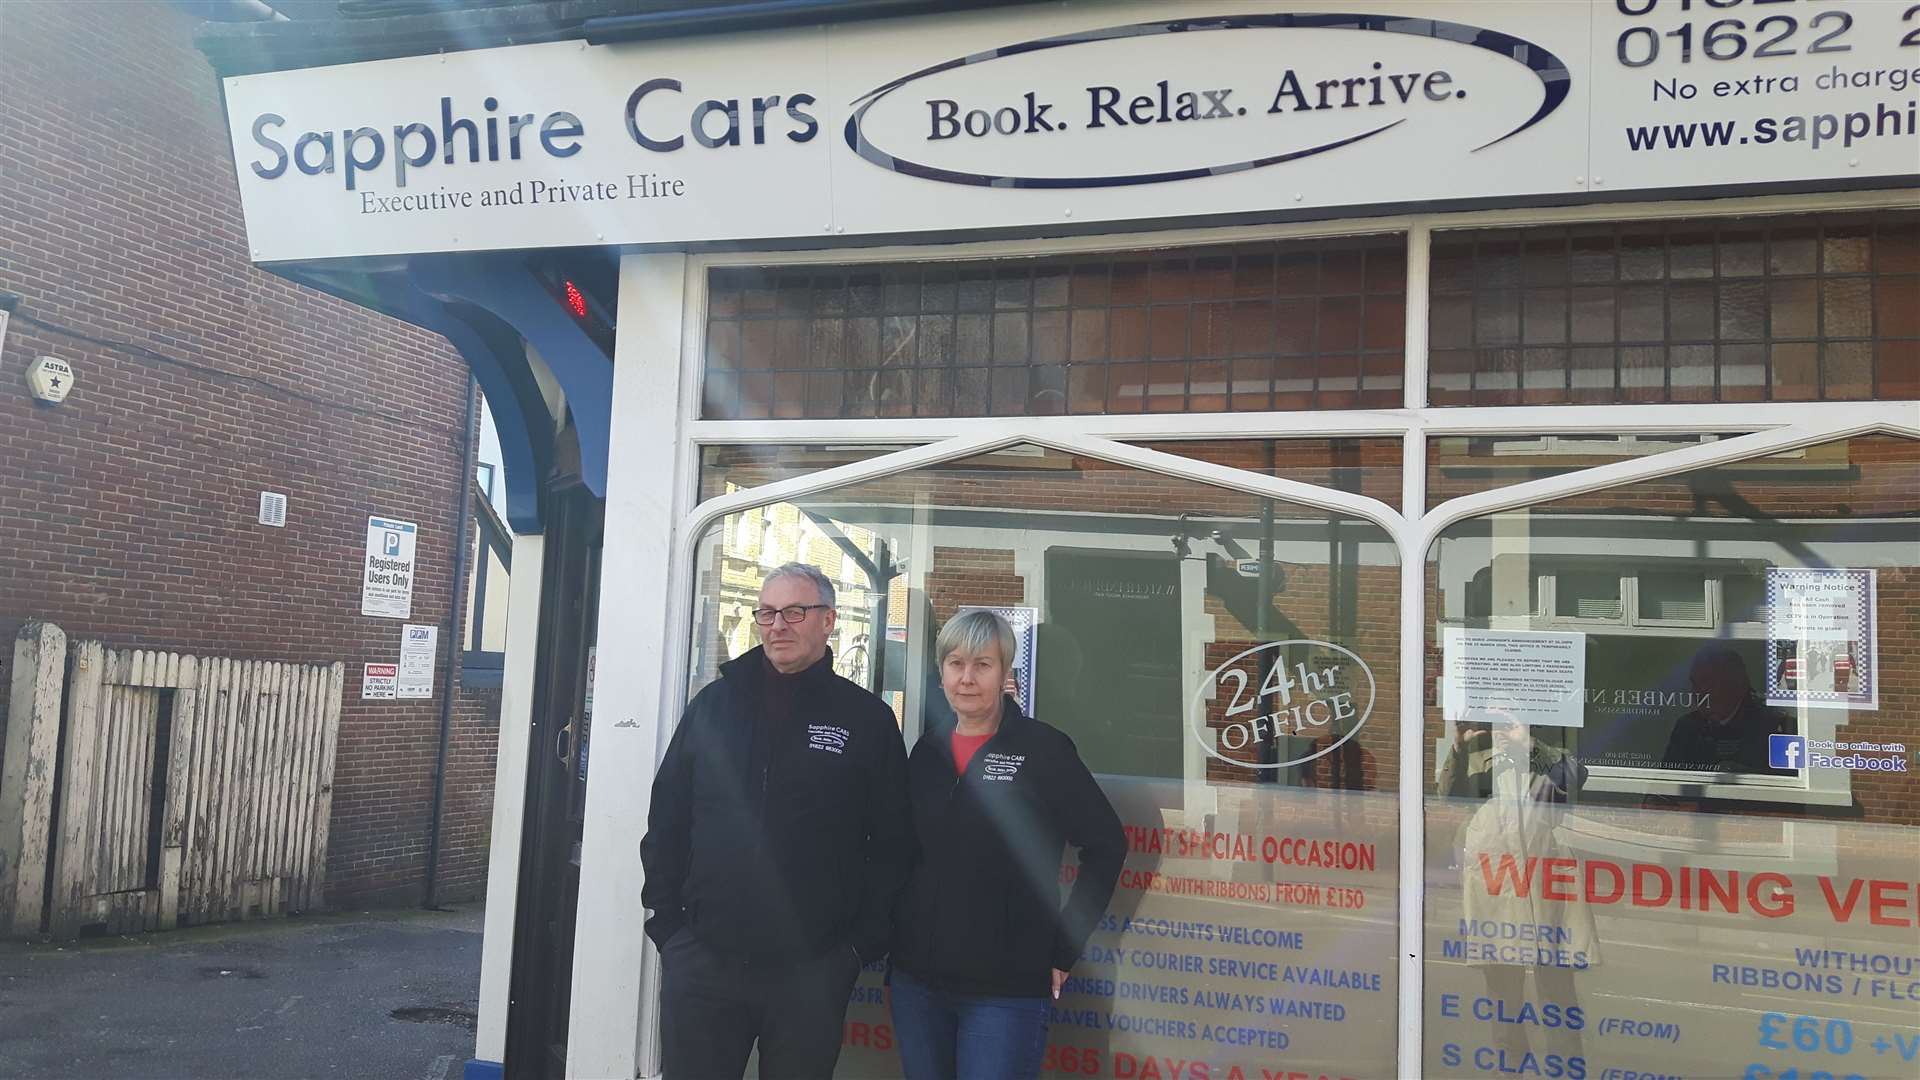 Mark and Tracie Jones, owners of Sapphire Cars, Pudding Lane, Maidstone